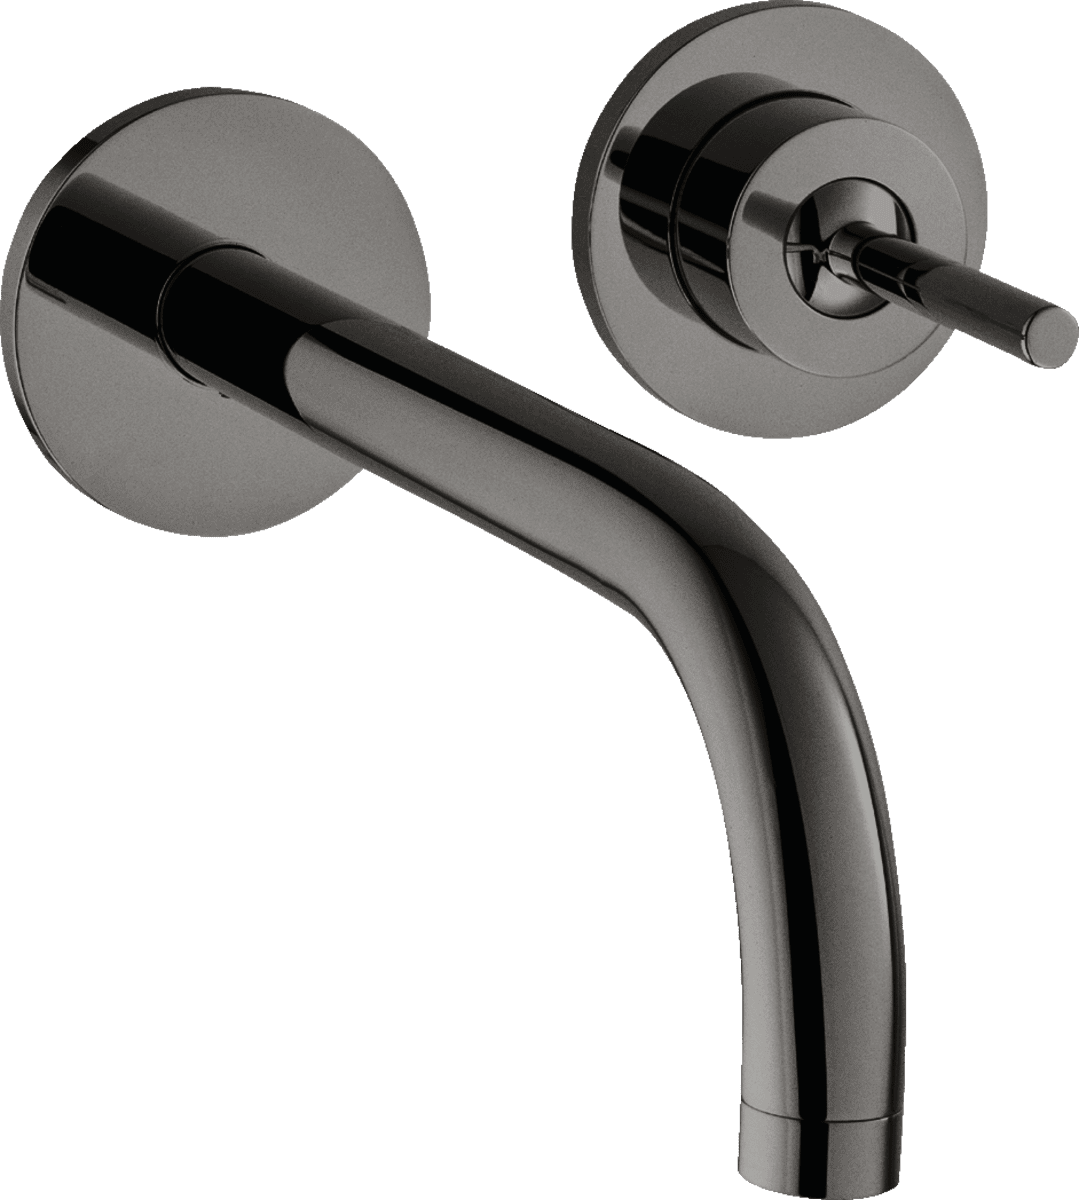 Picture of HANSGROHE AXOR Uno Single lever basin mixer for concealed installation wall-mounted with spout 225 mm and escutcheons #38116330 - Polished Black Chrome